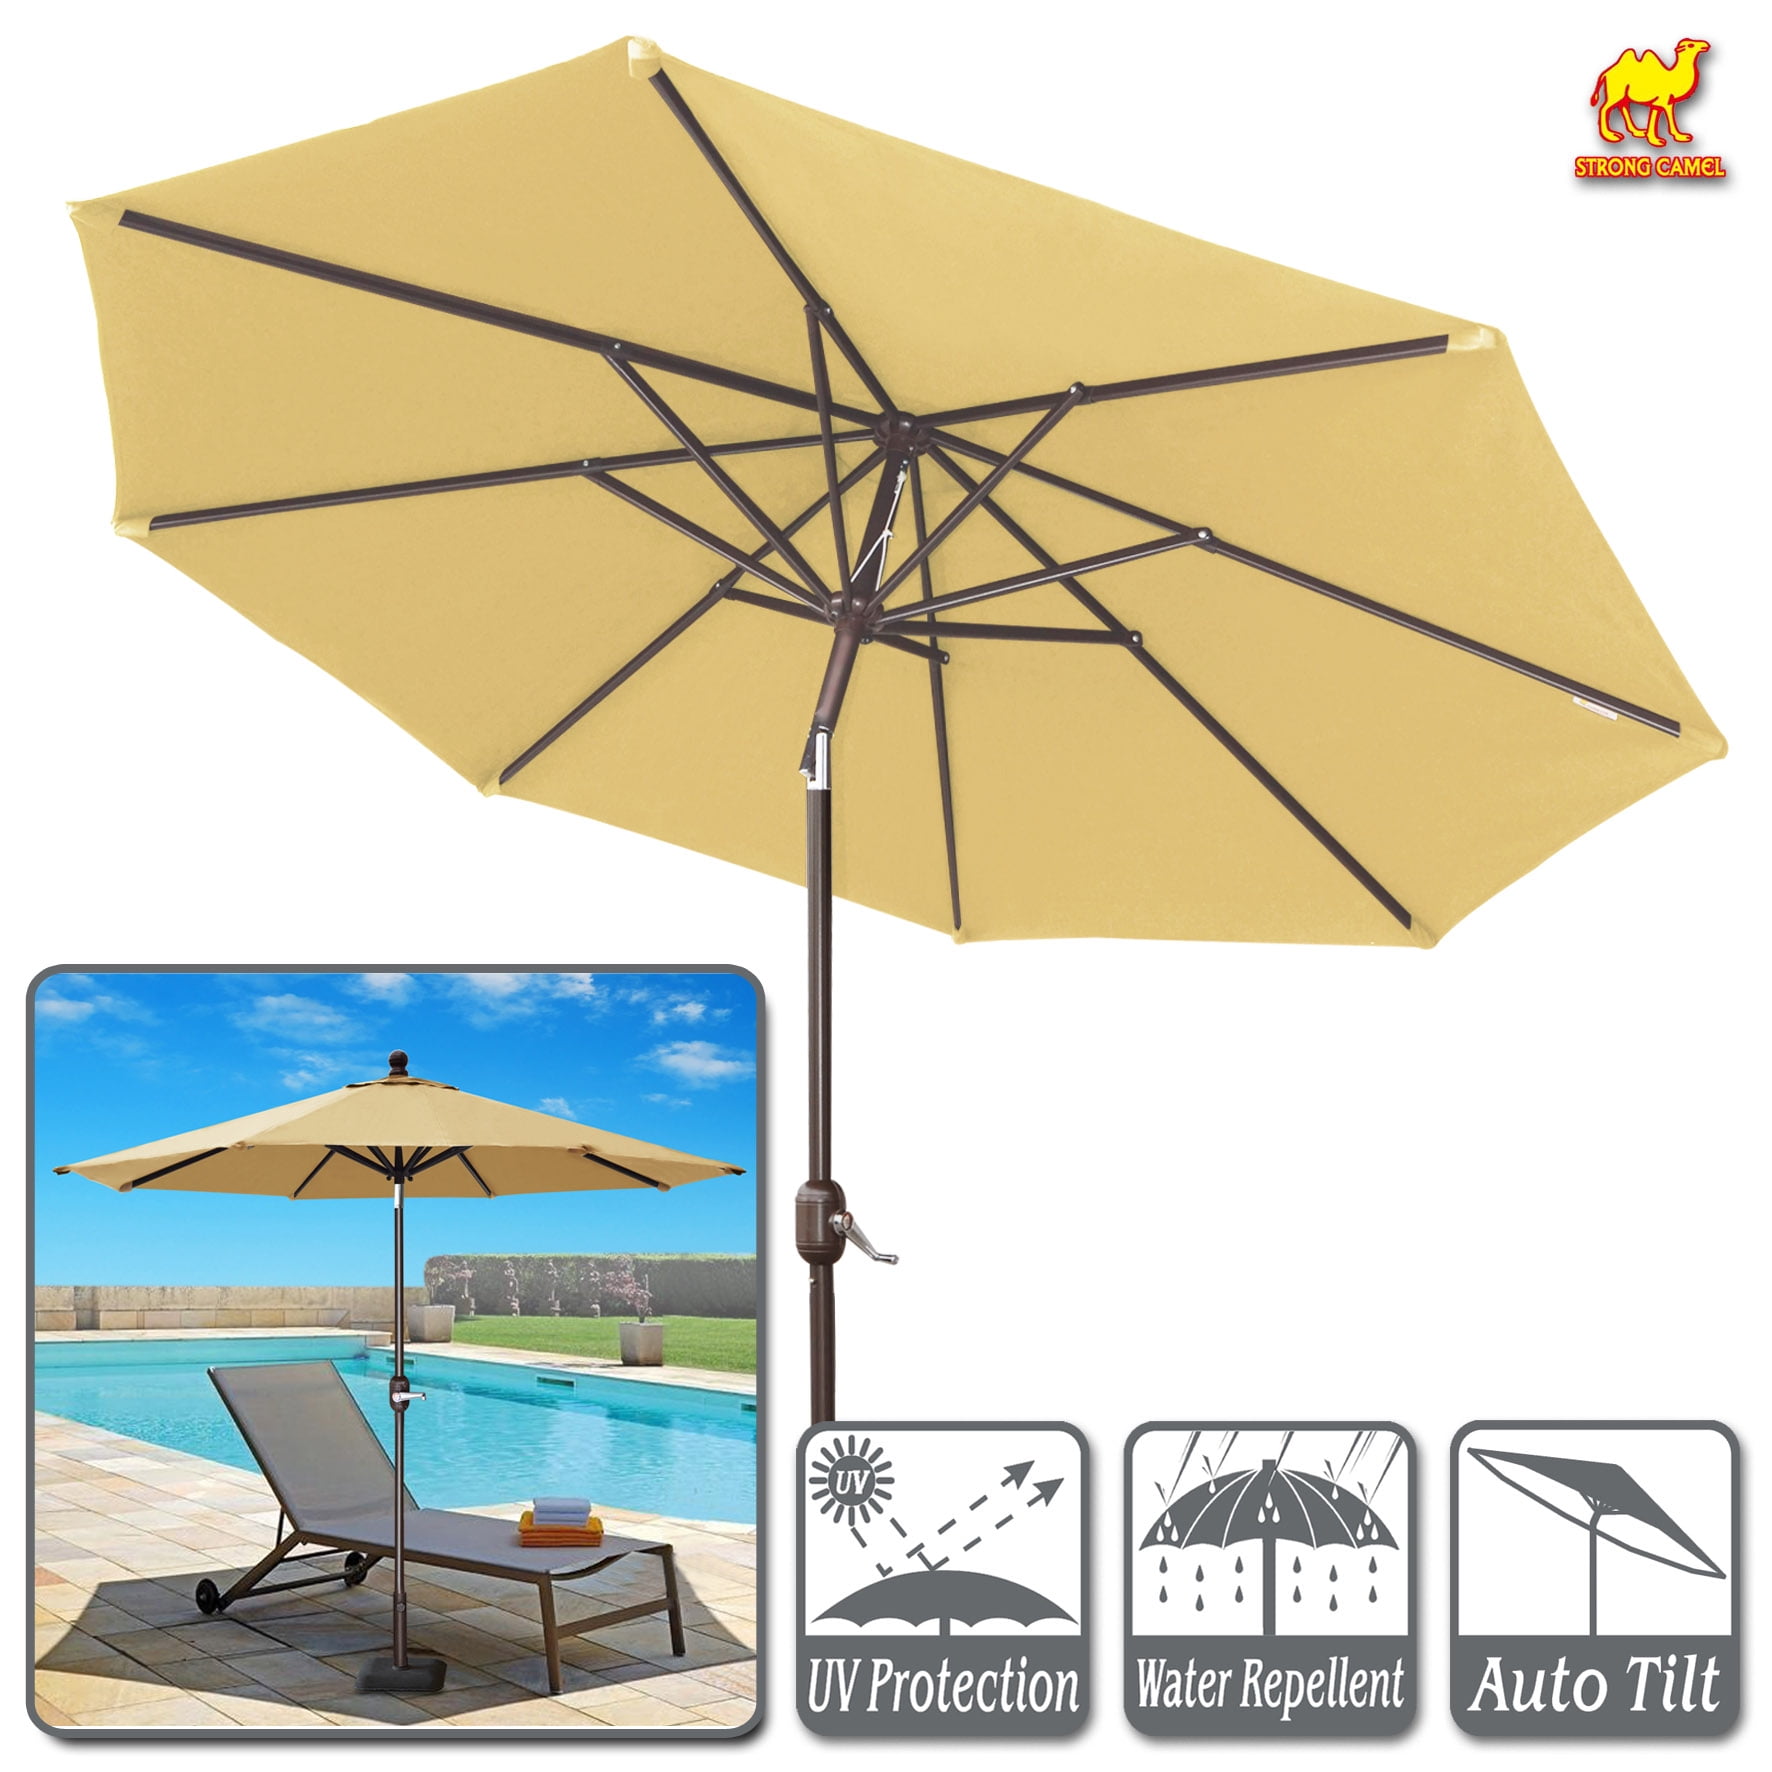 Strong Camel 9 Ft Aluminum Patio Umbrella with Auto Tilt and Crank With Polyester Cover Alu. 8